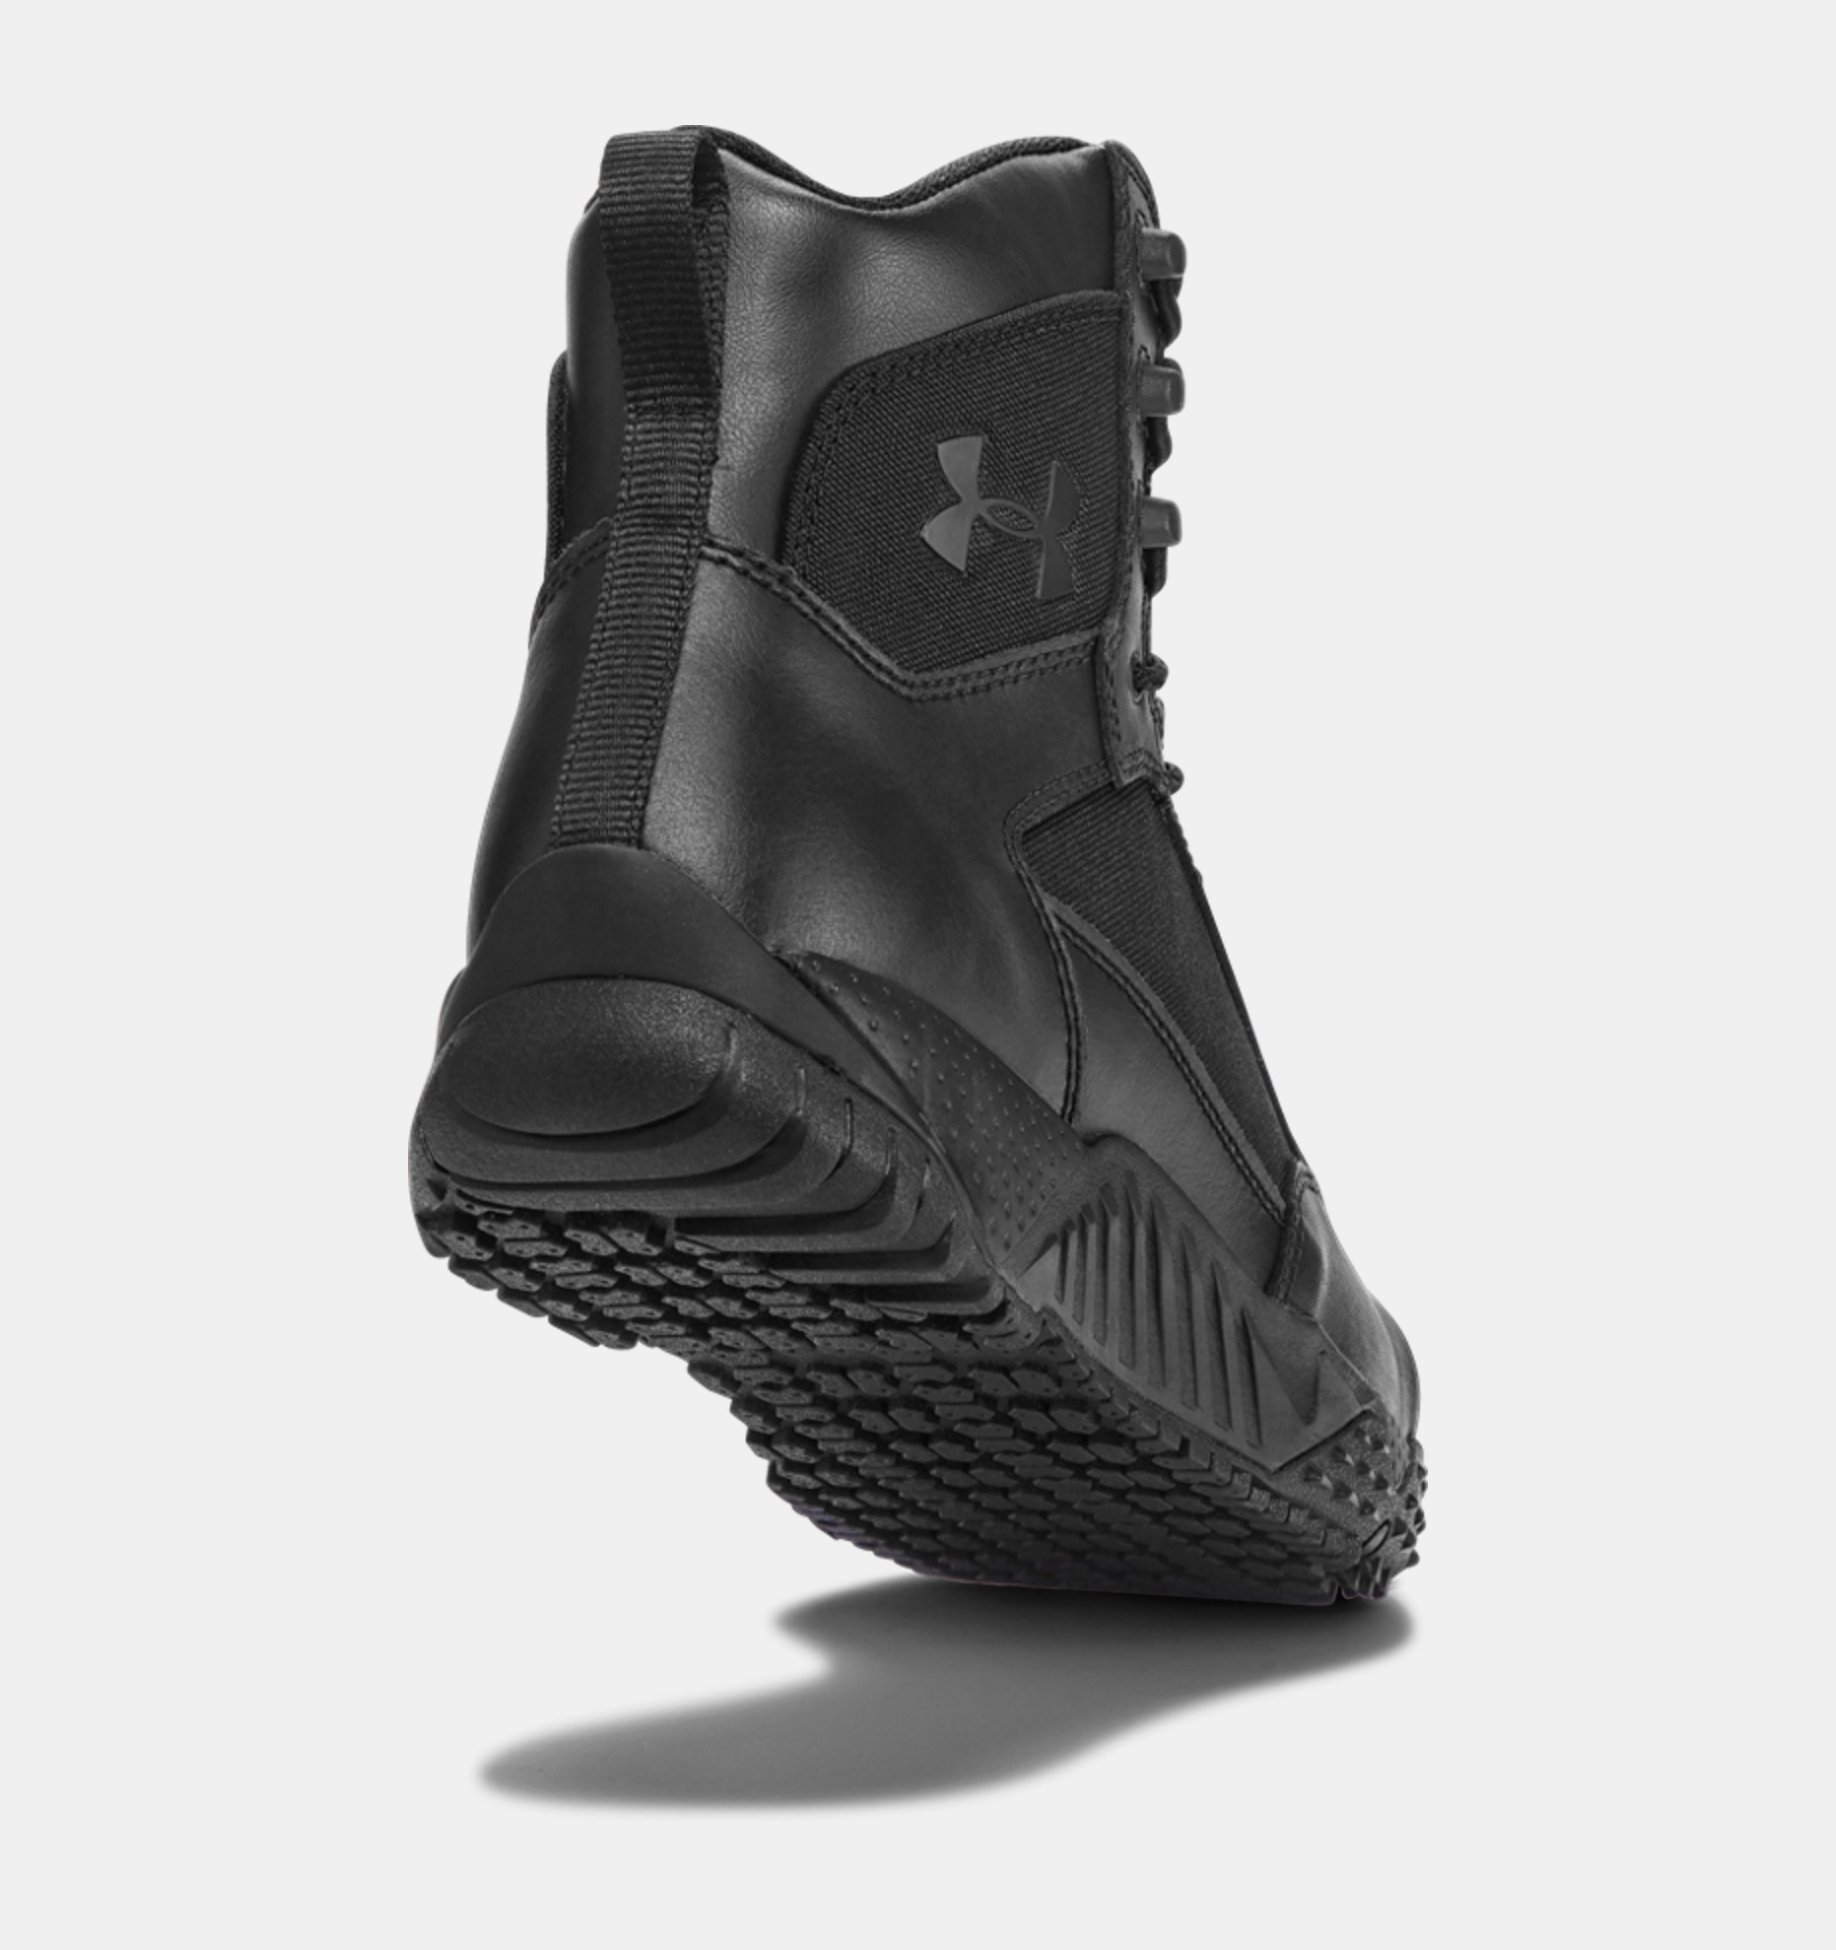 Under Armour Black Stellar Tactical Protect Boots UA Composite Toe Tac Boot 